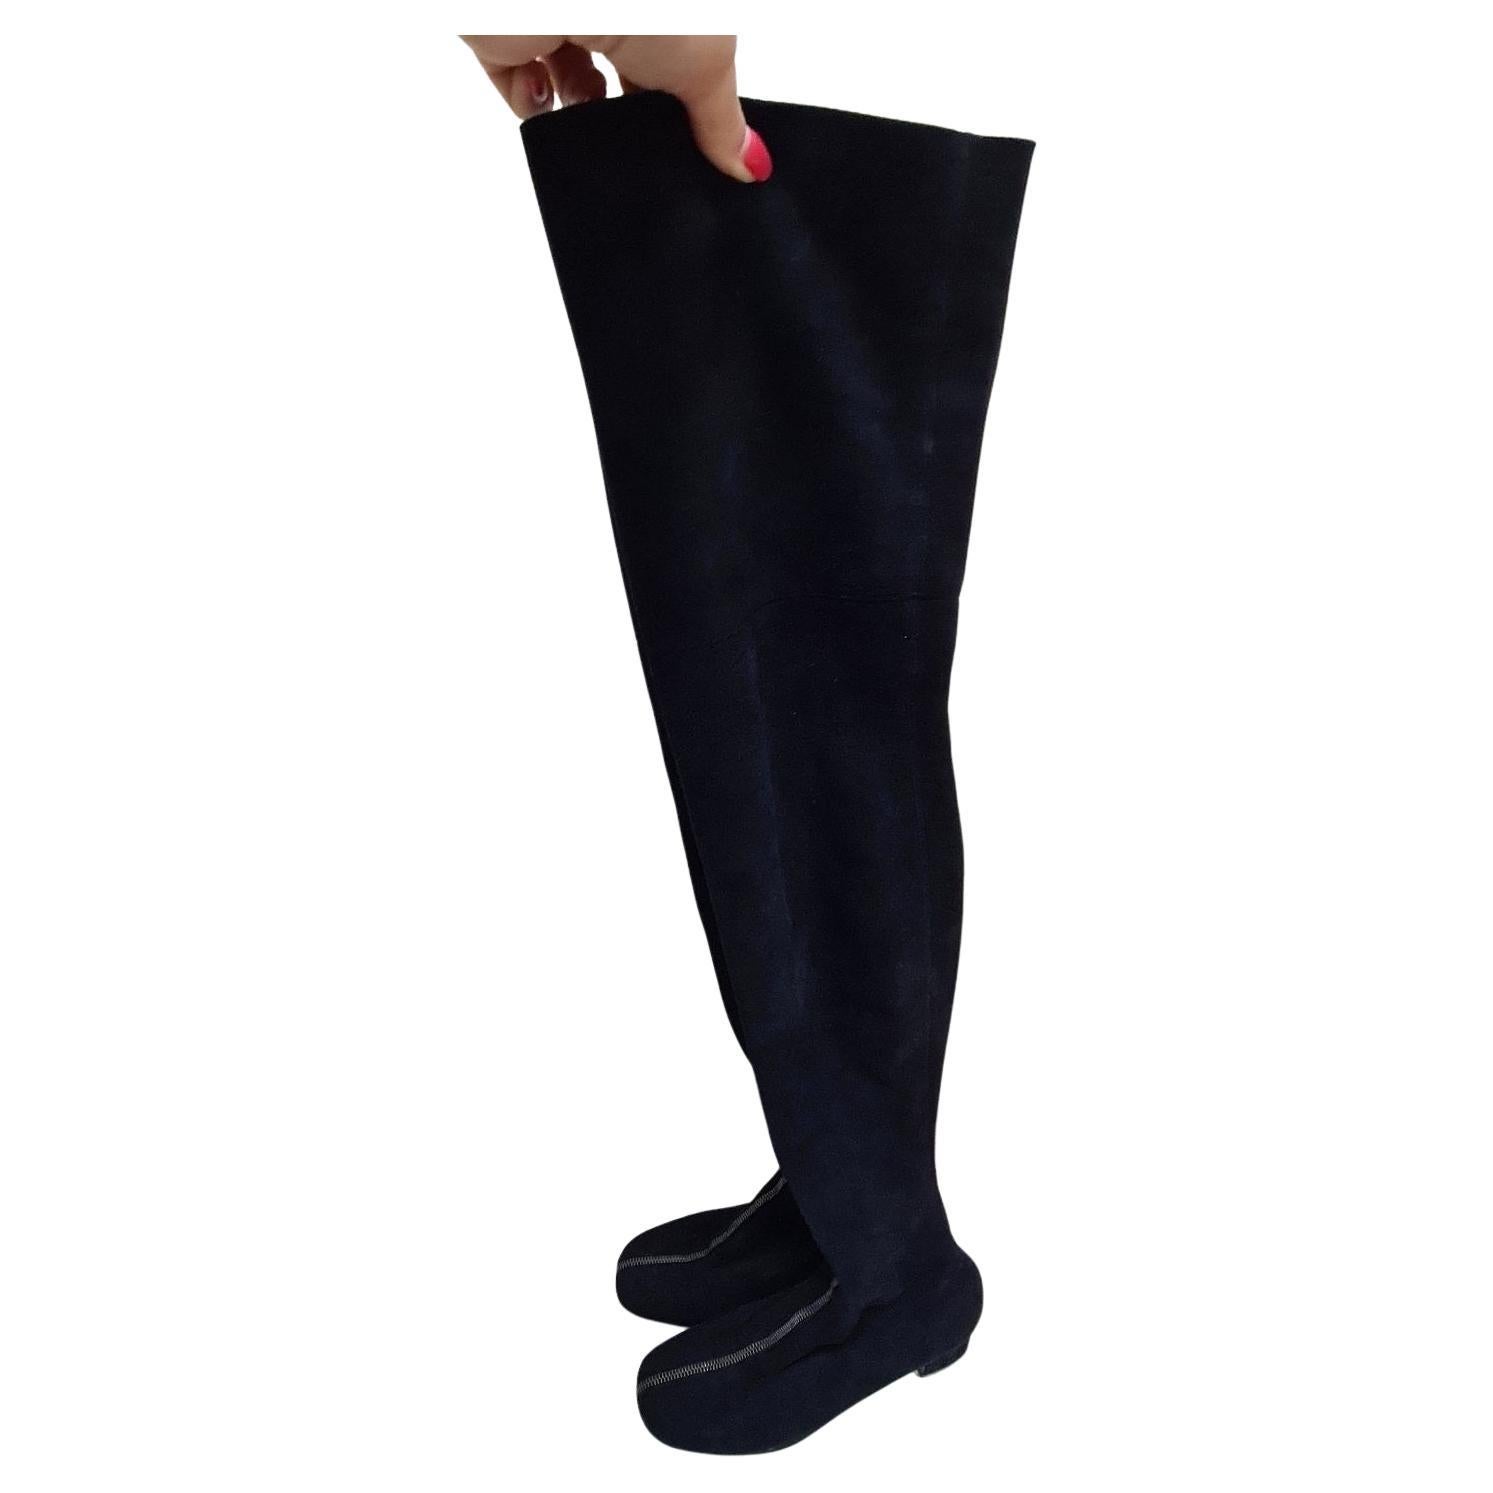 What are knee high boots called?